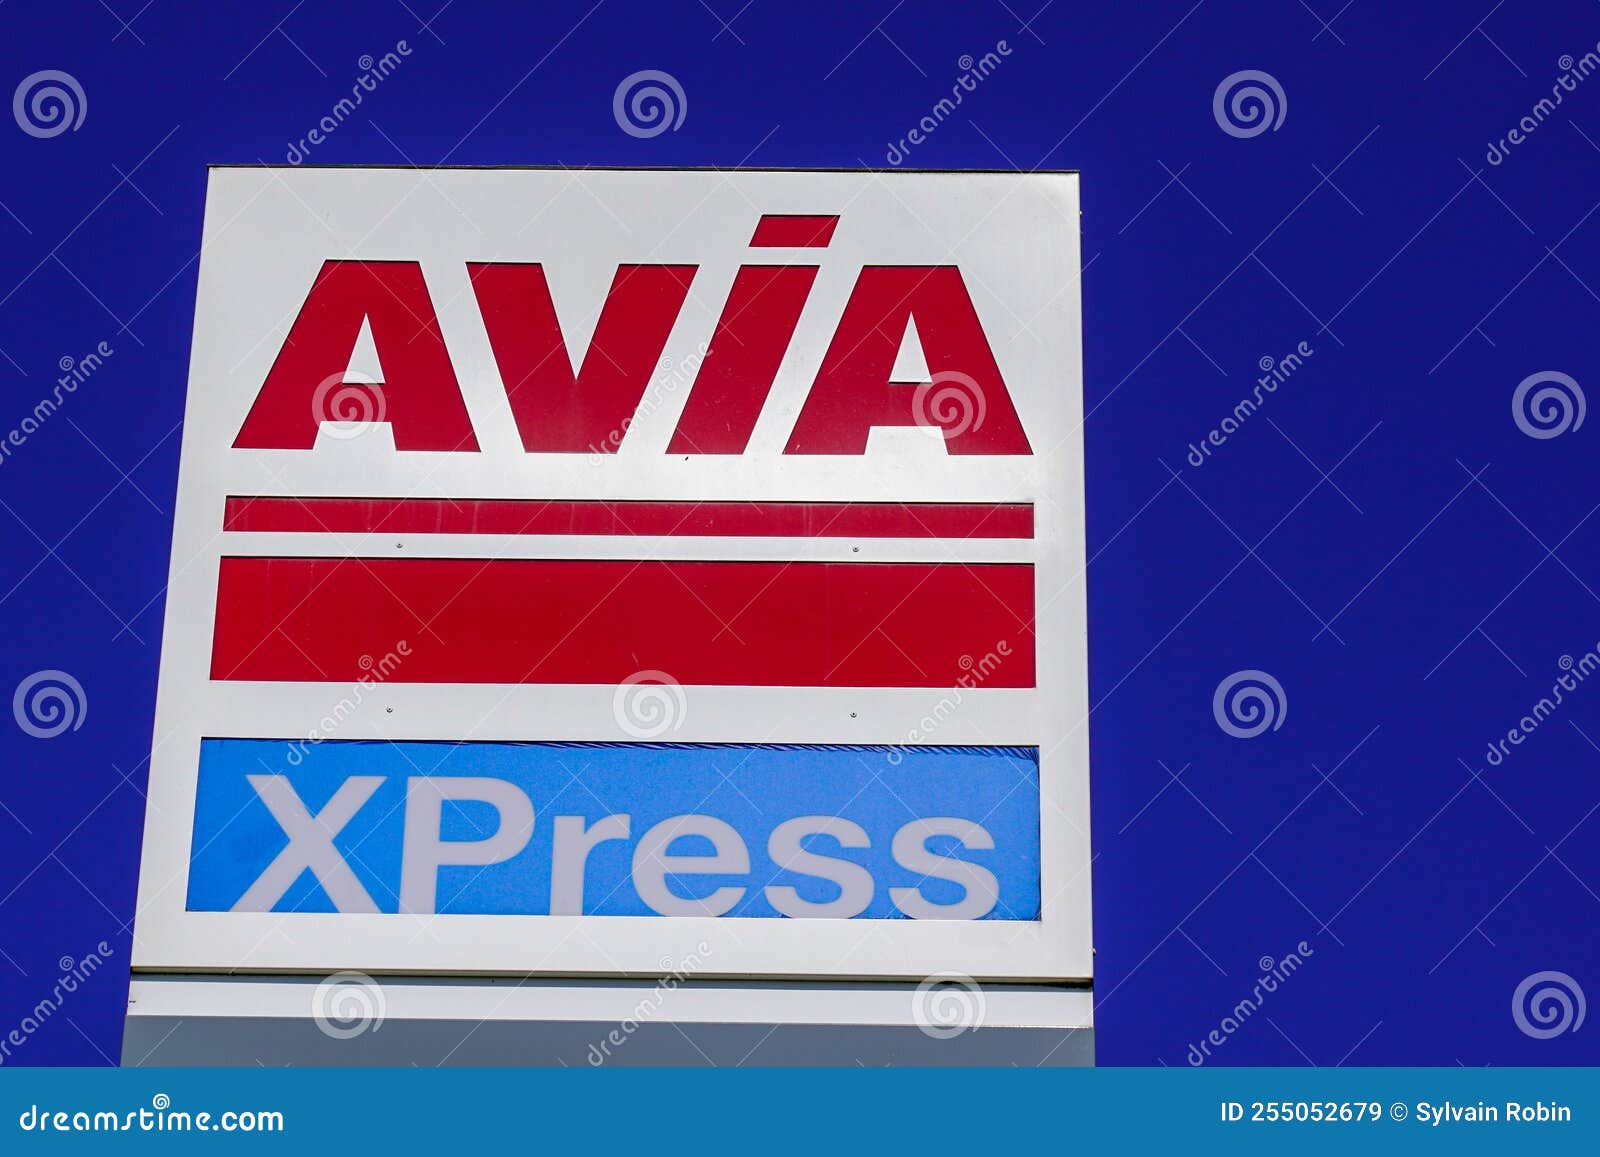 Avia Xpress Gas Station Text Brand Company Logo Sign Service Petrol Pump  Store Editorial Stock Image - Image of crude, gasoline: 255052679